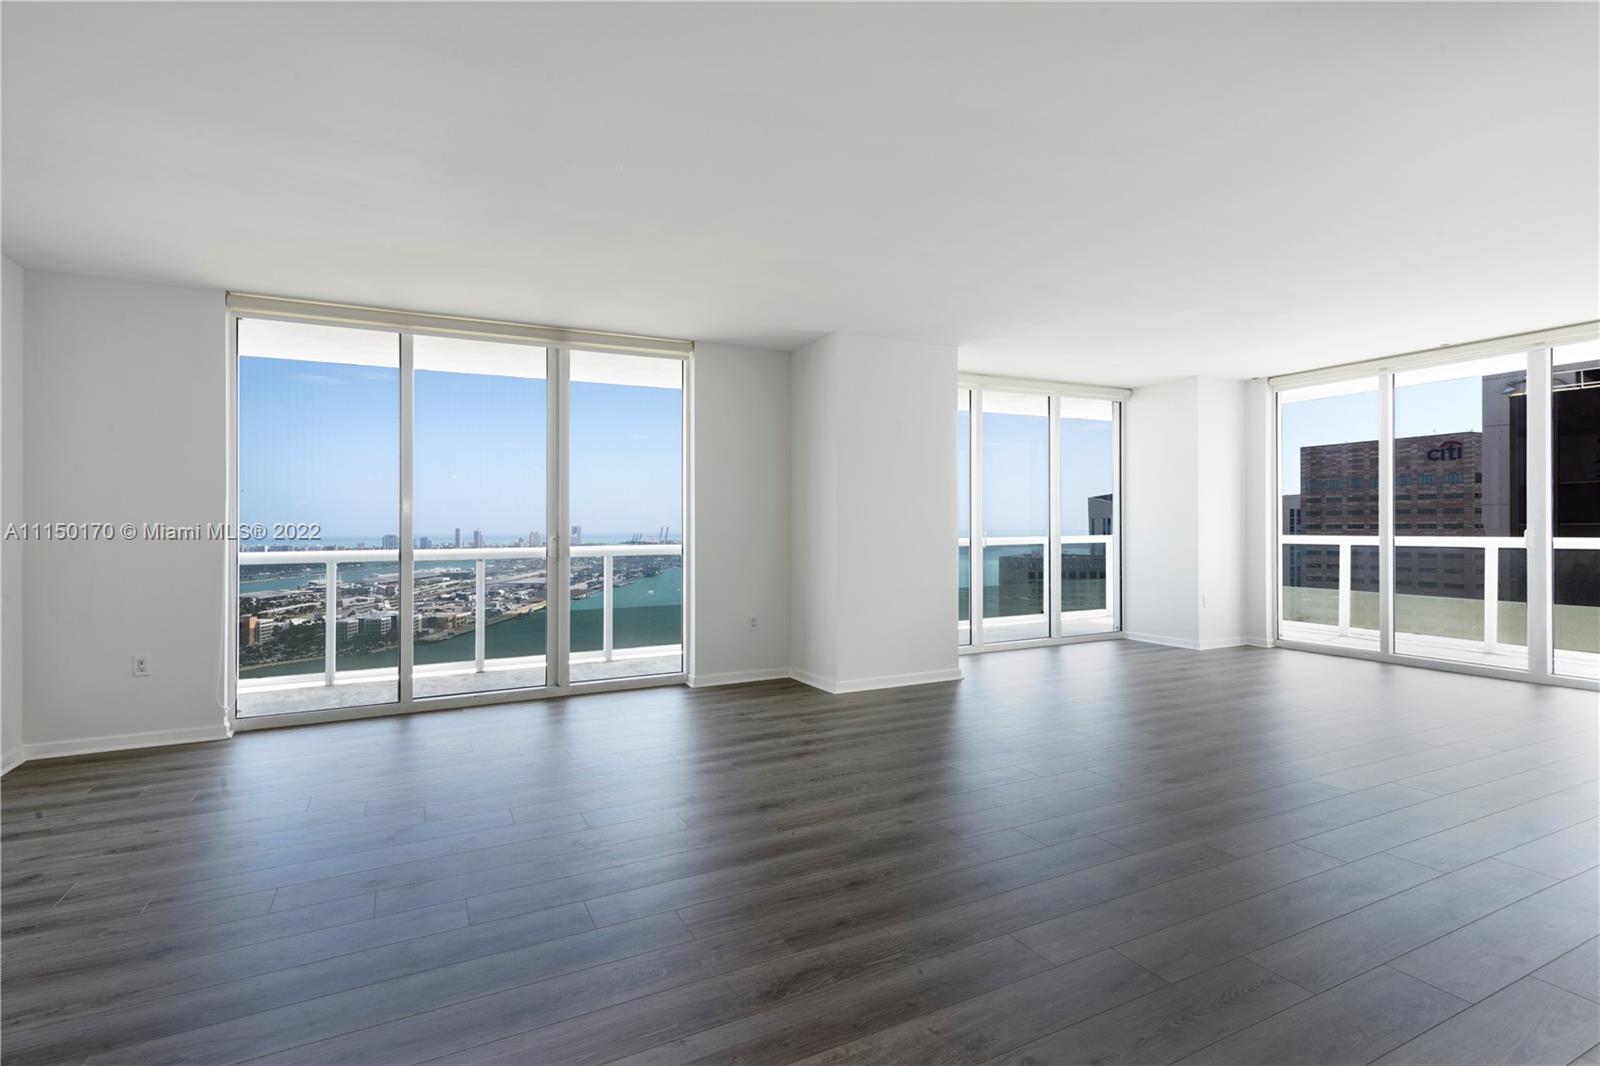 Stunning and remodeled apartment 3 beds / 2 baths with breathtaking direct bay and ocean views. Larg